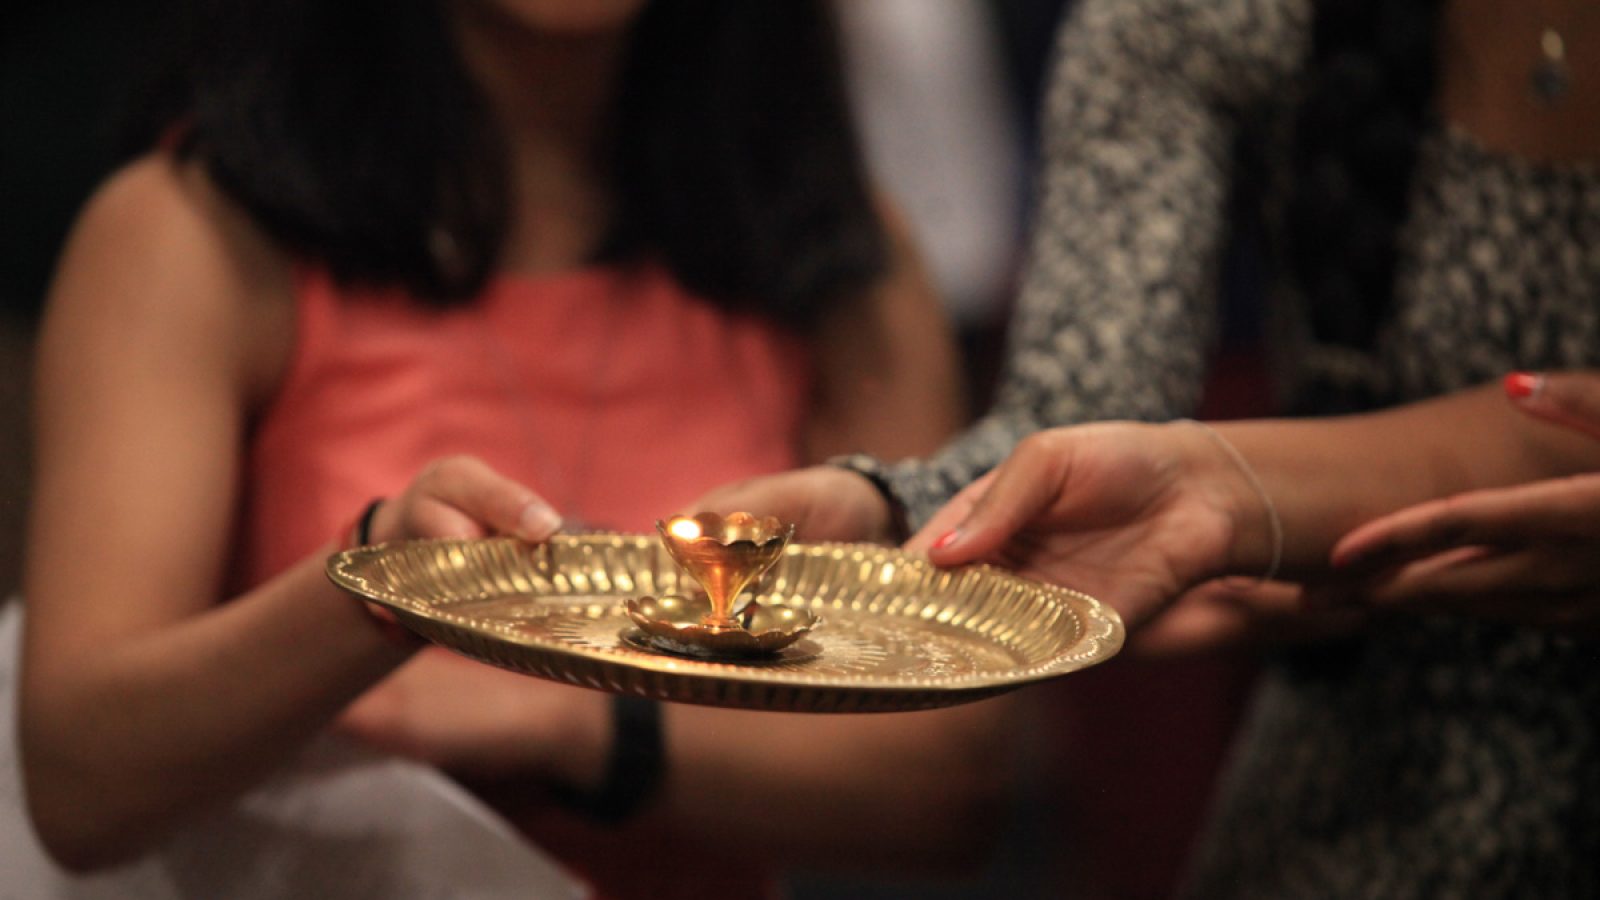 Students hold a gold ghee-lamp in the Hindu ritual of aarti, which asks God to bless the devotee's heart and mind with love and compassion.